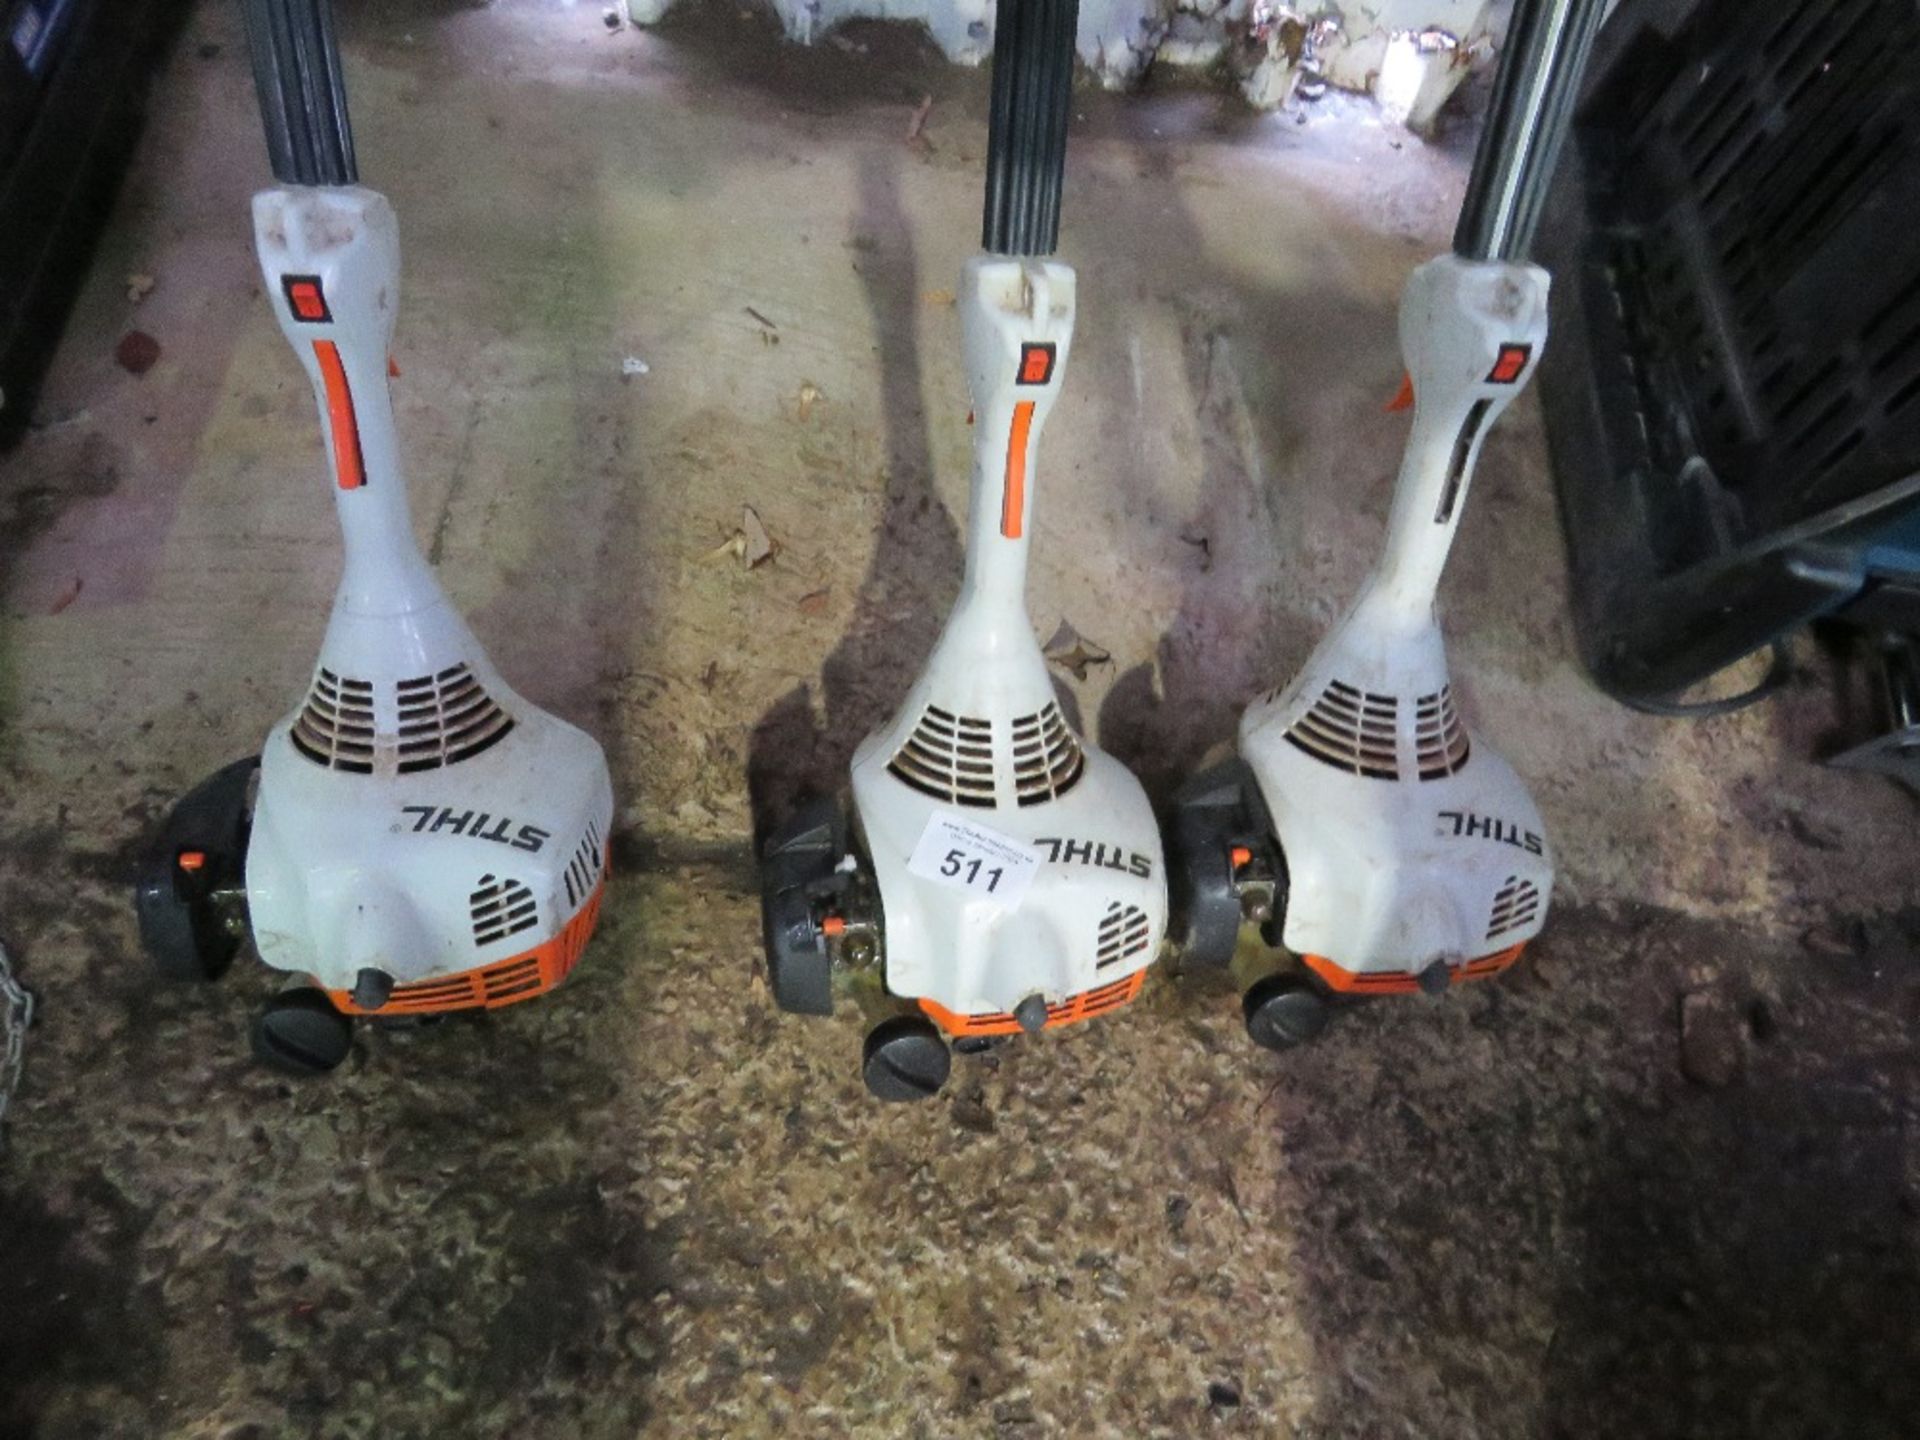 3 X STIHL PETROL ENGINED STRIMMERS. - Image 2 of 5